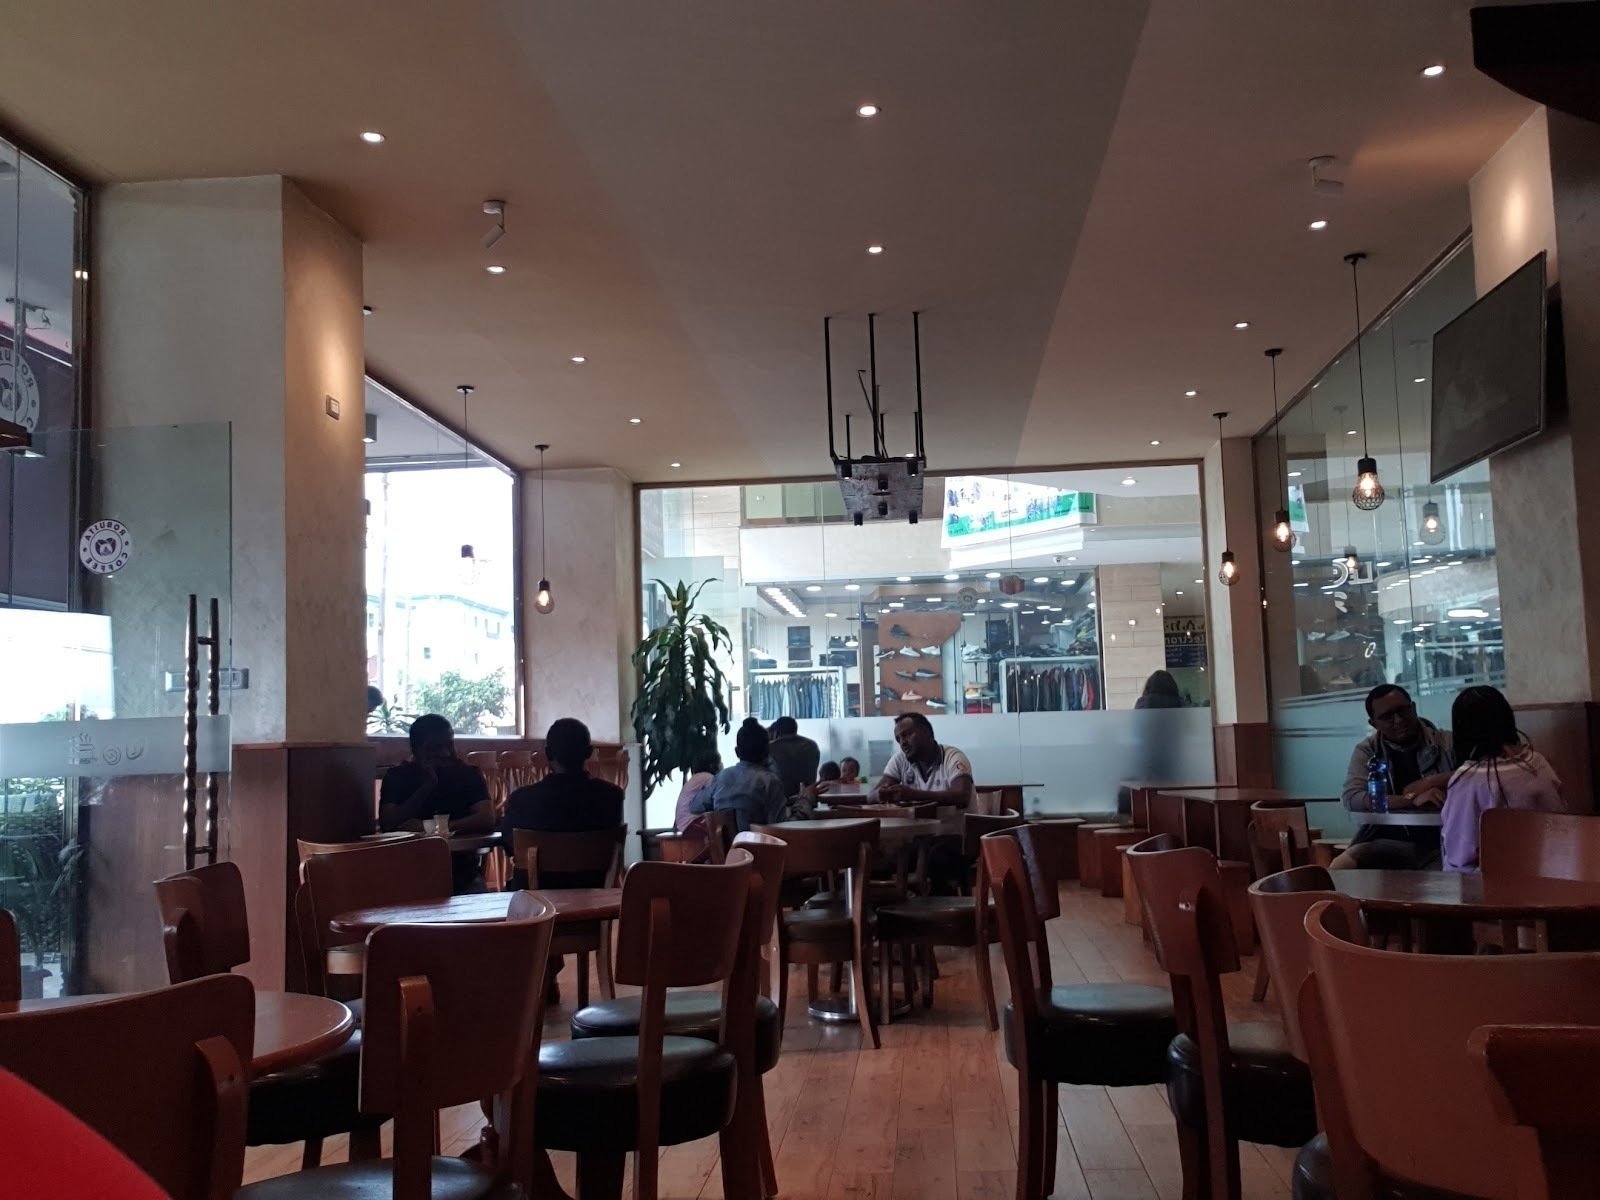 <span class="translation_missing" title="translation missing: en.meta.location_title, location_name: Robusta Coffee | ሮቡስታ ቡና, city: Addis Ababa">Location Title</span>